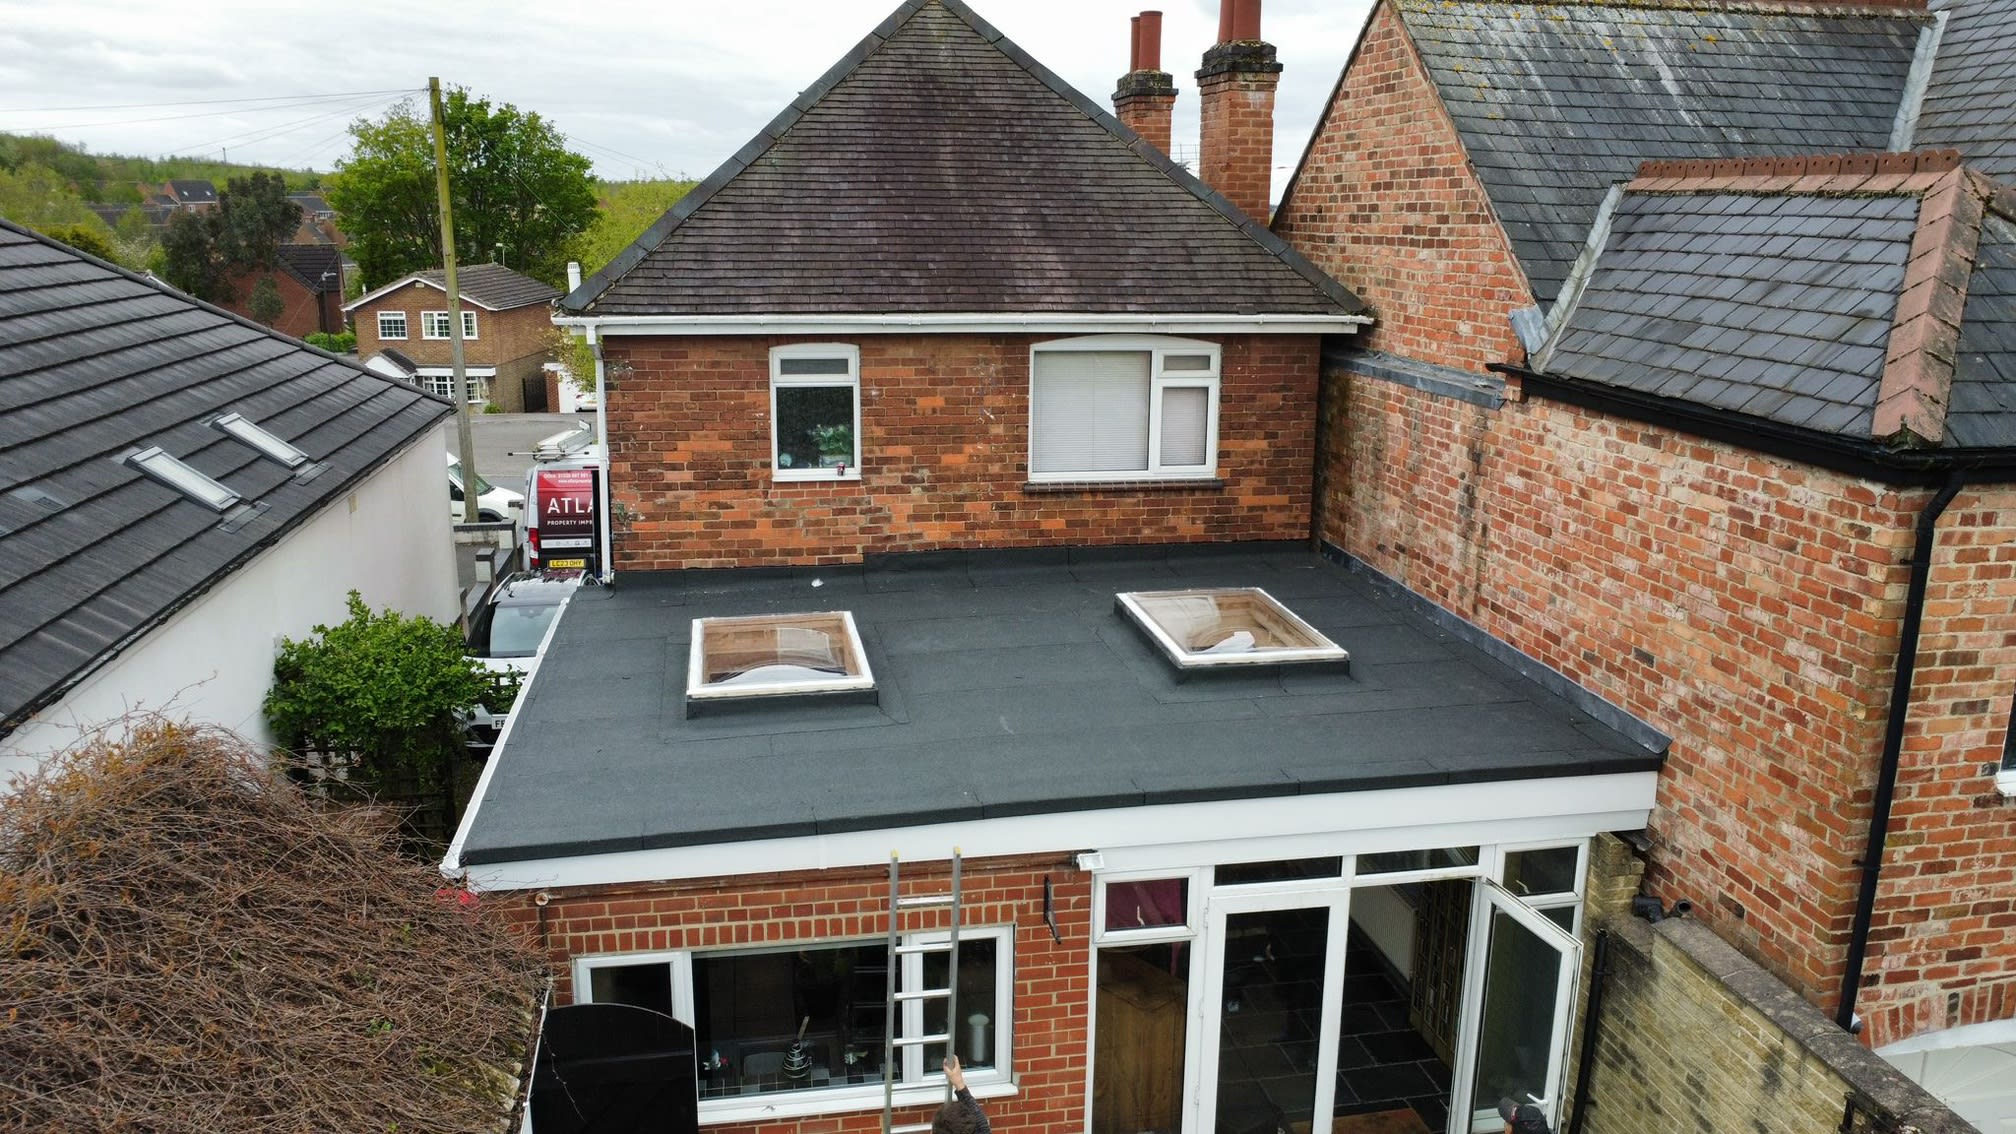 Ashby Roofing Ashby-De-La-Zouch 01530 569729